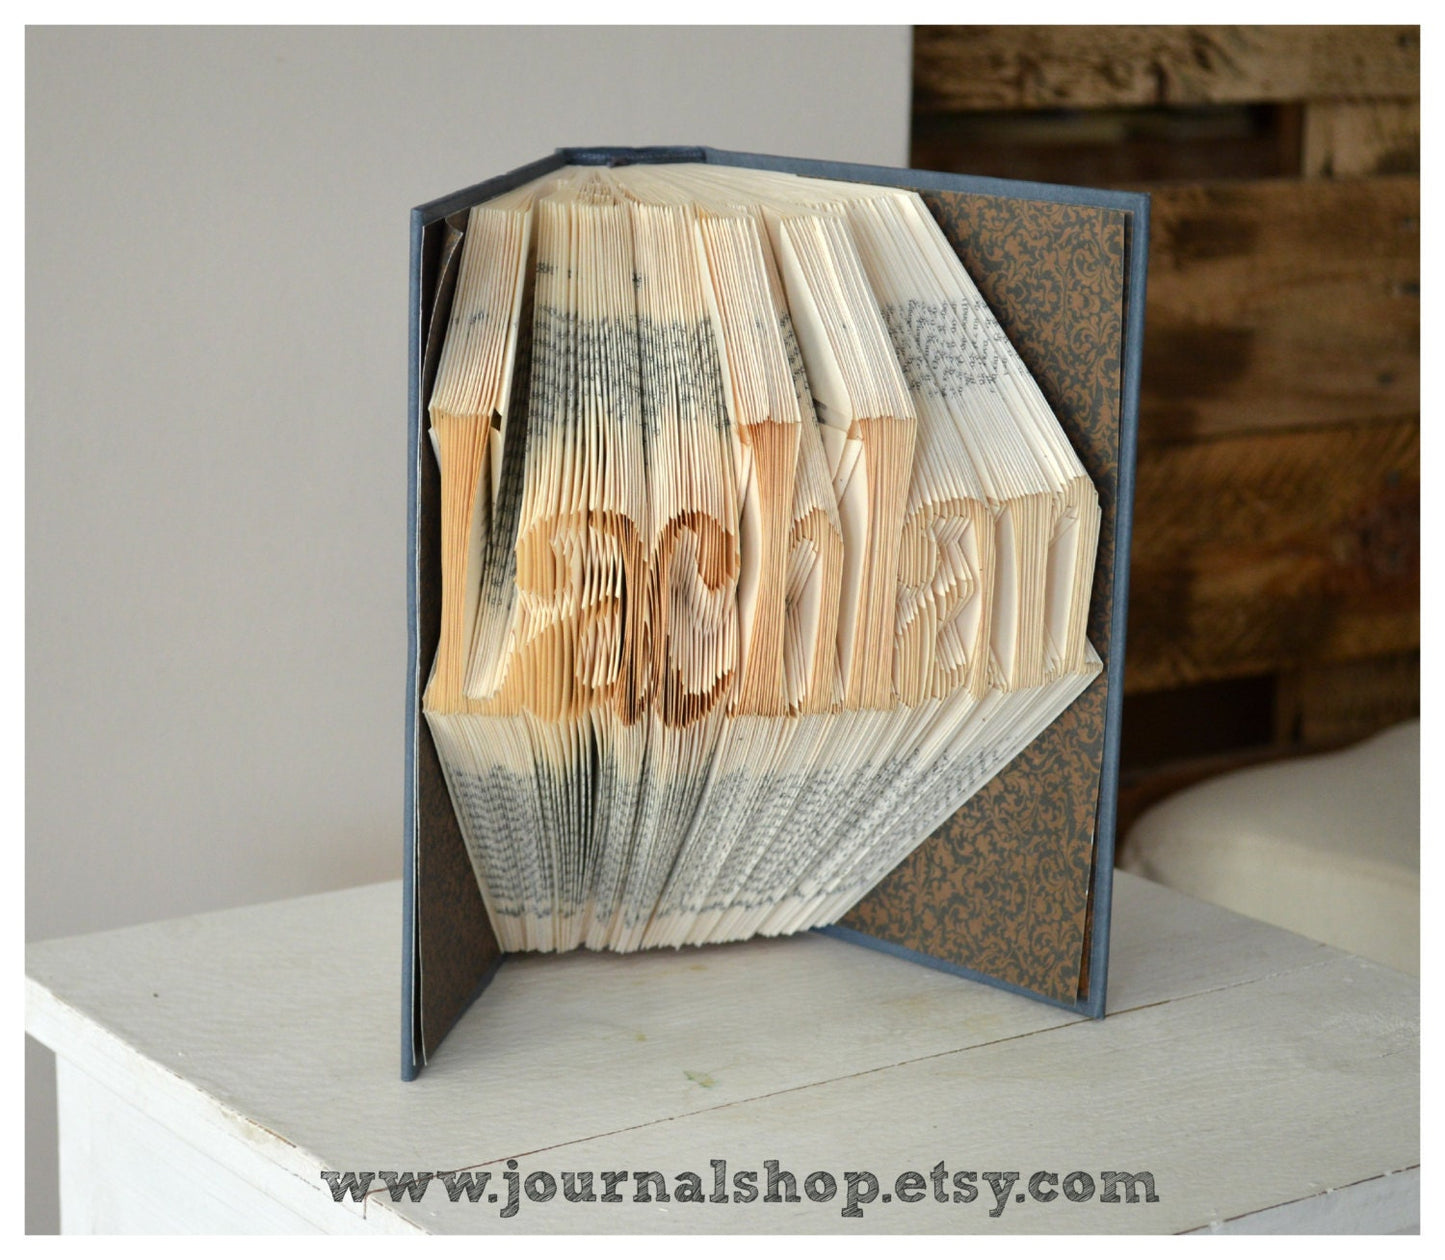 Personalized folded book for gift, bookfolding art with your name or word, book art gift, book folding gift for wedding decor, bookish gift